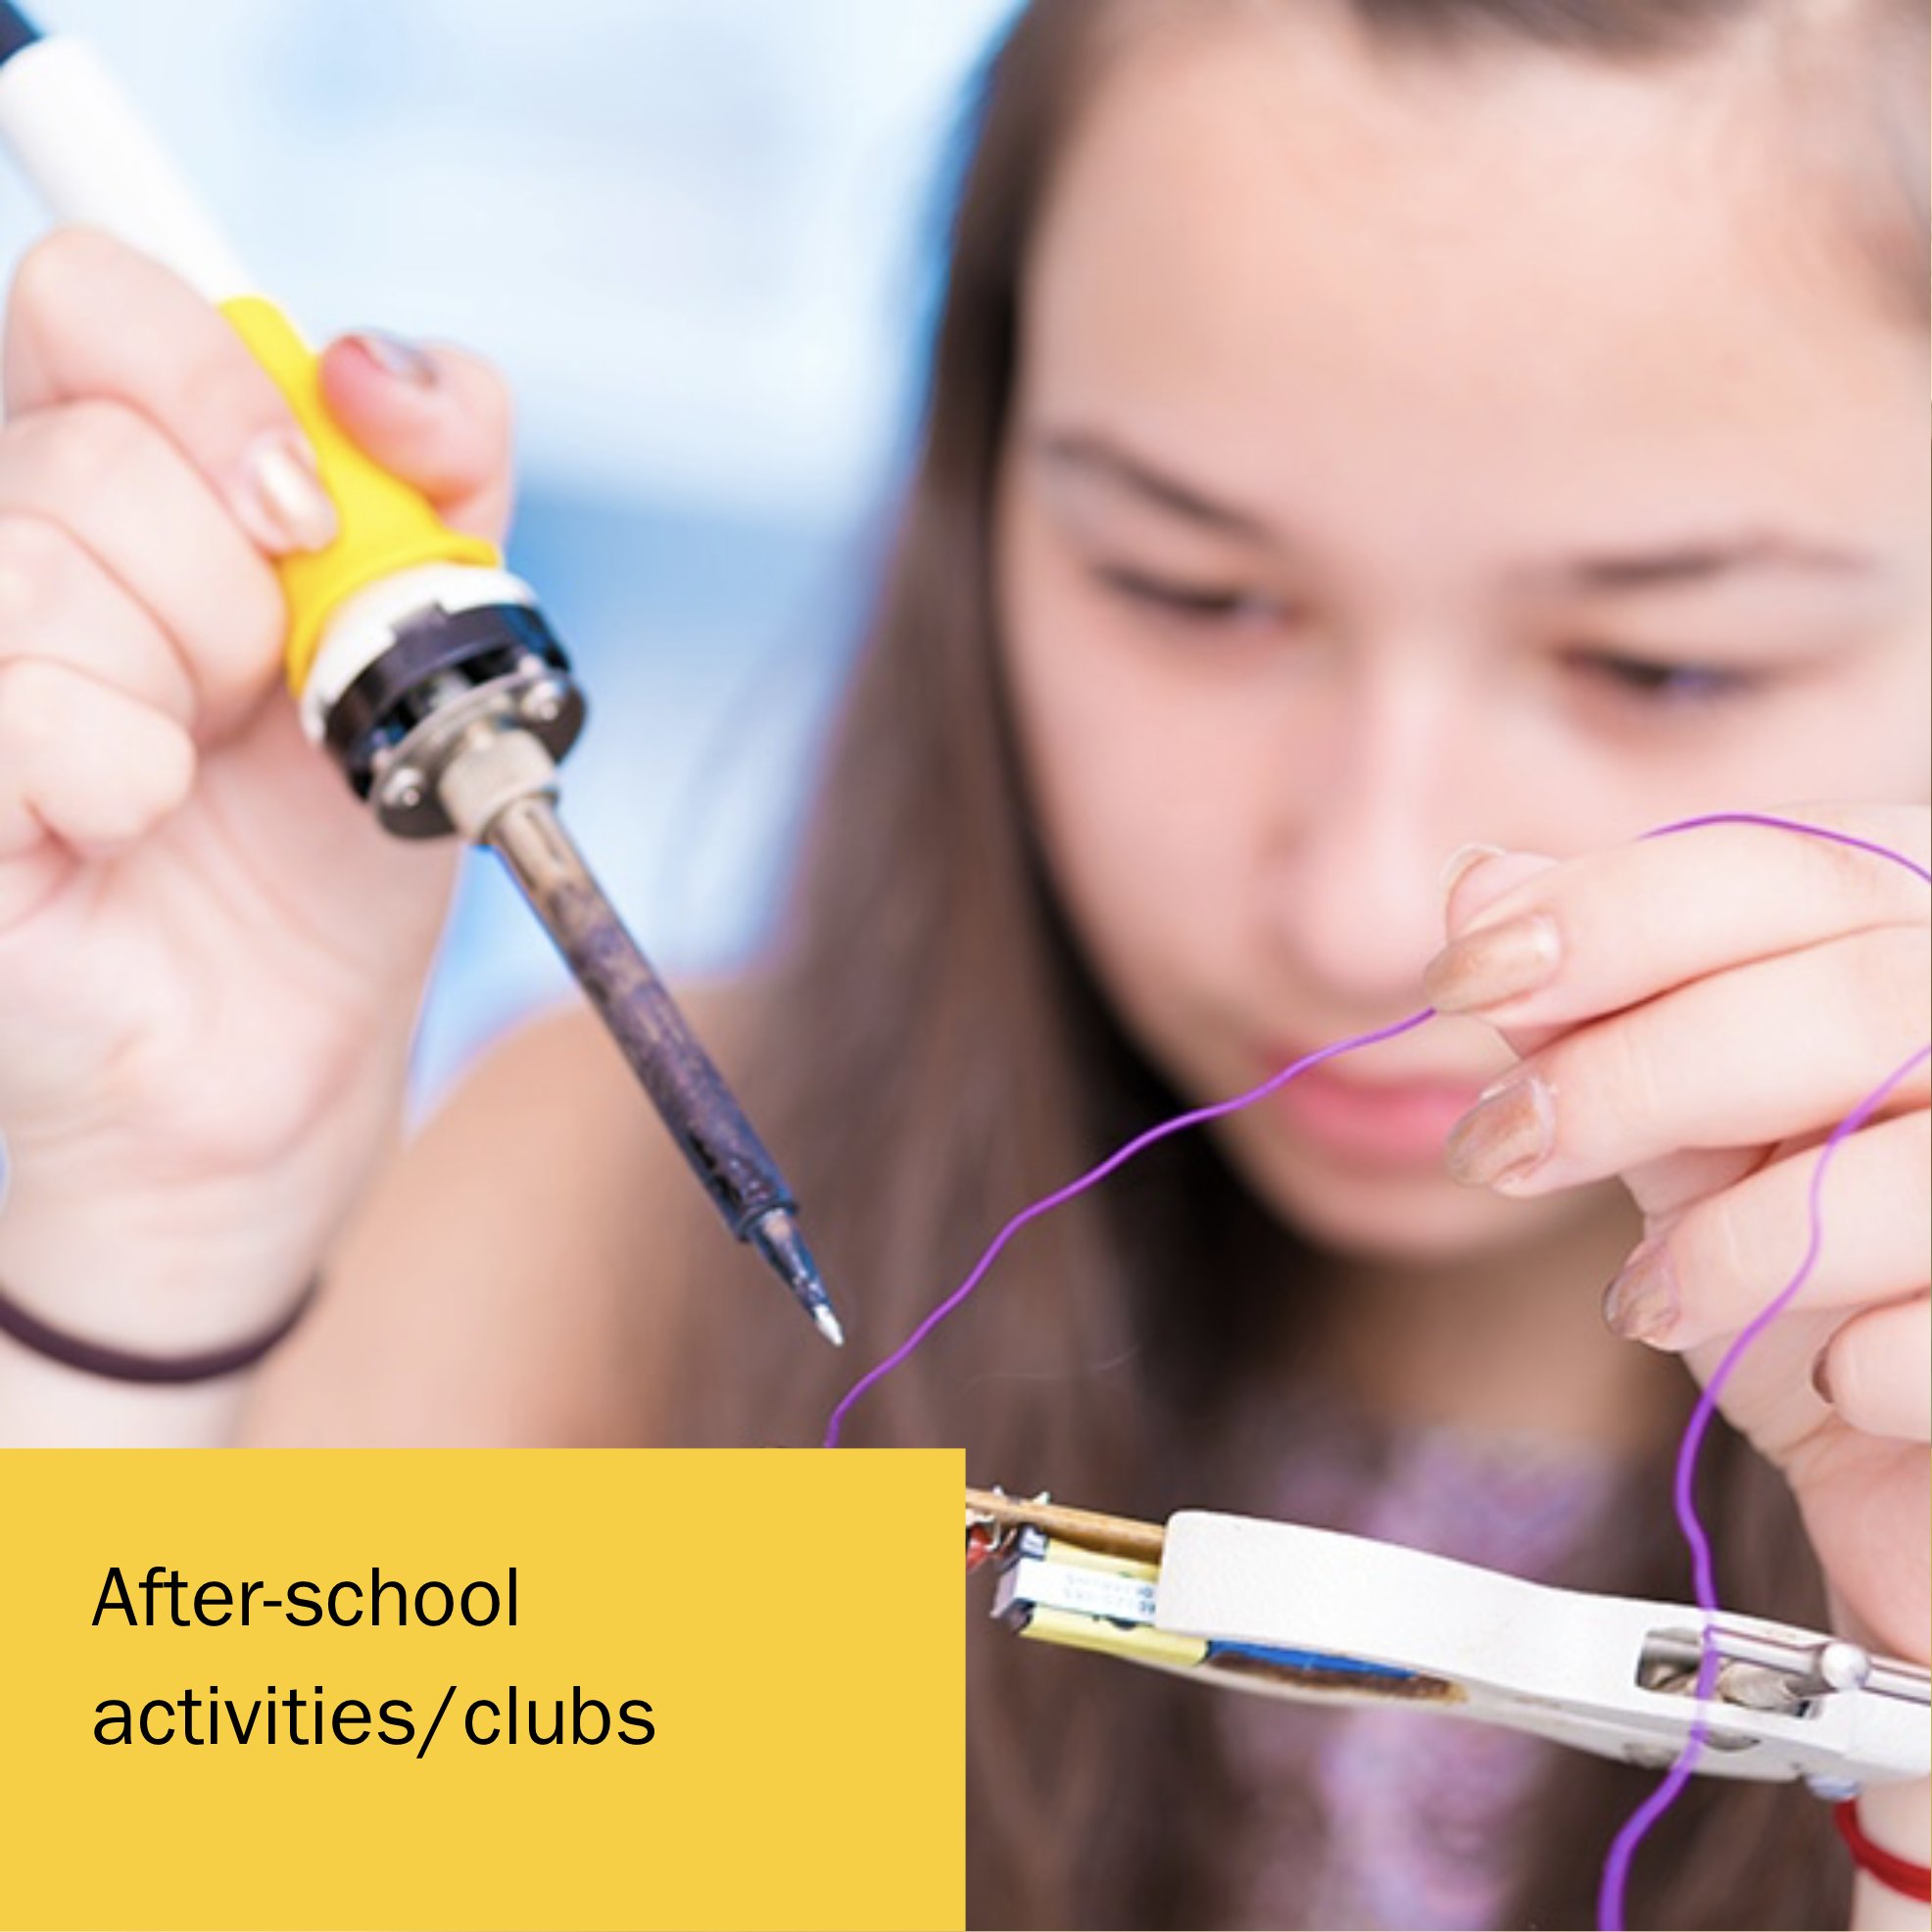 Image of a girl soldering wires in a device with the caption After-school activities and clubs